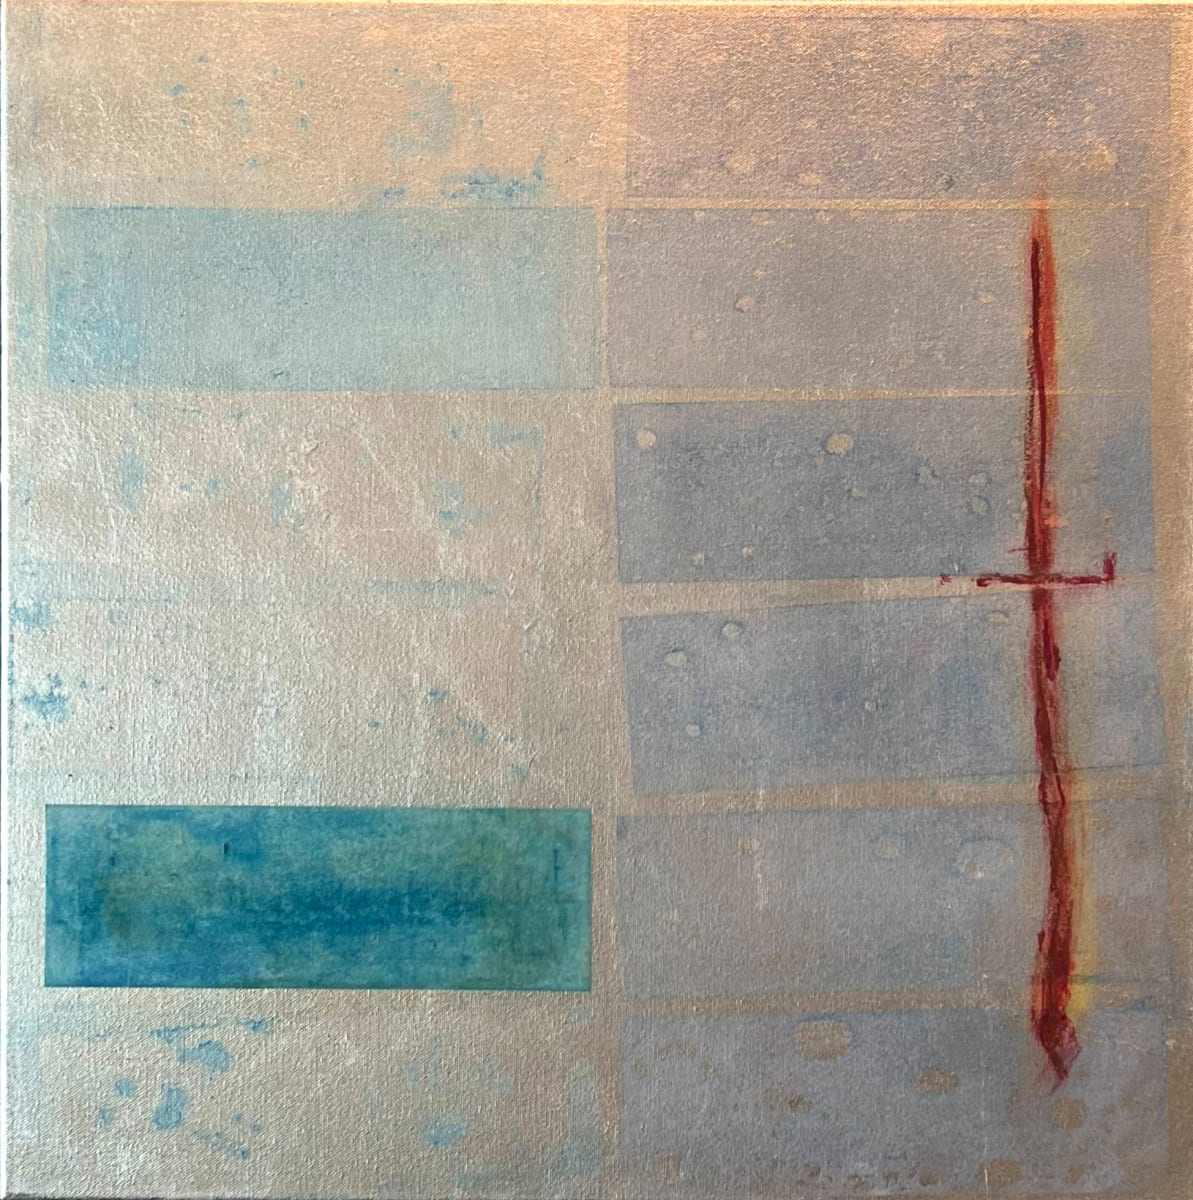 SILVER, BLUE RECTANGLES & RED LINE by Maria Cerro 